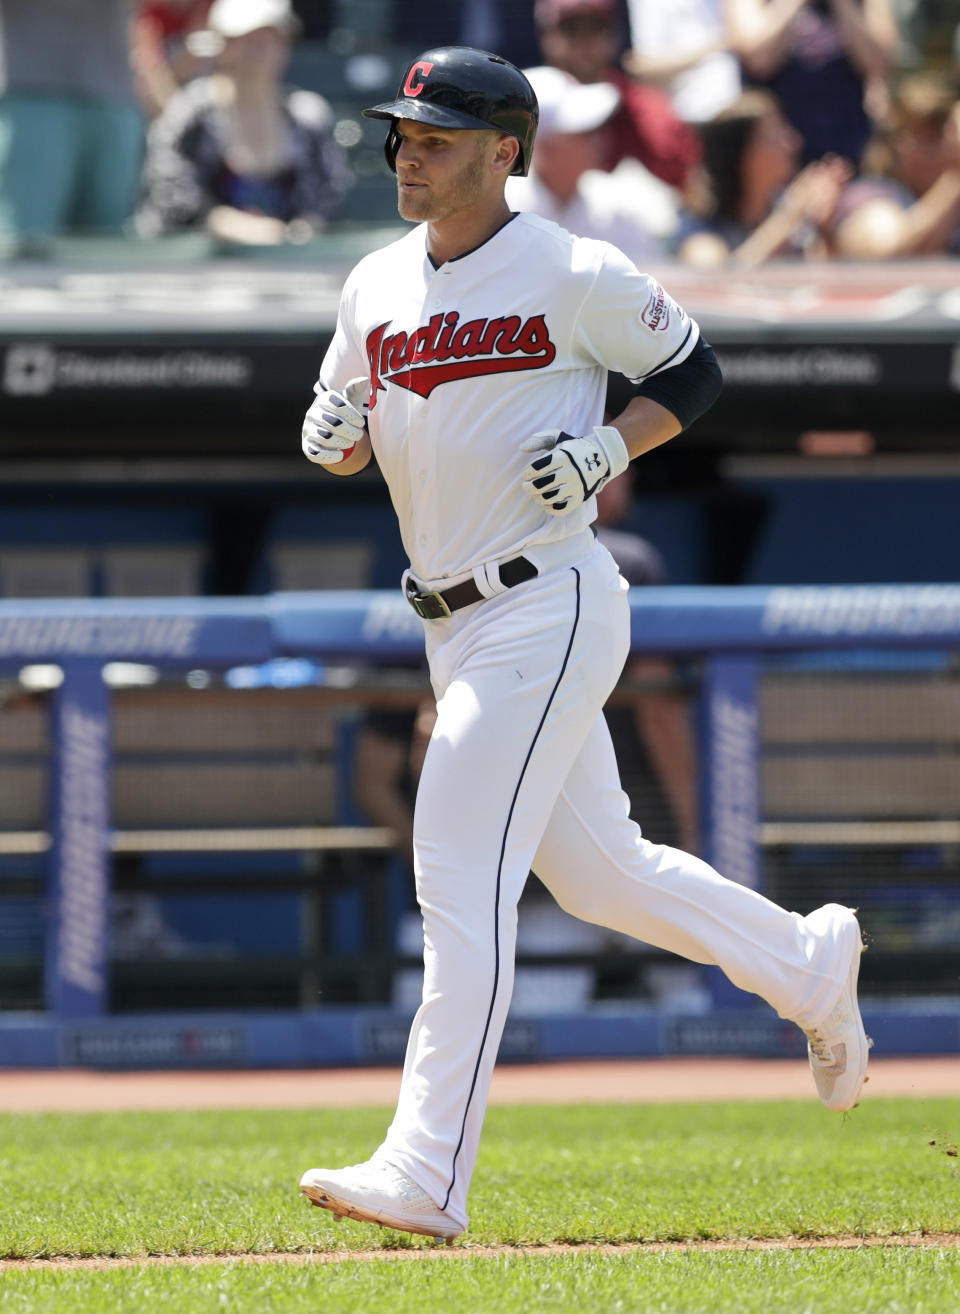 Cleveland Indians' Jake Bauers runs the bases after hitting a solo home run in the fourth inning in a baseball game against the Kansas City Royals, Wednesday, June 26, 2019, in Cleveland. (AP Photo/Tony Dejak)